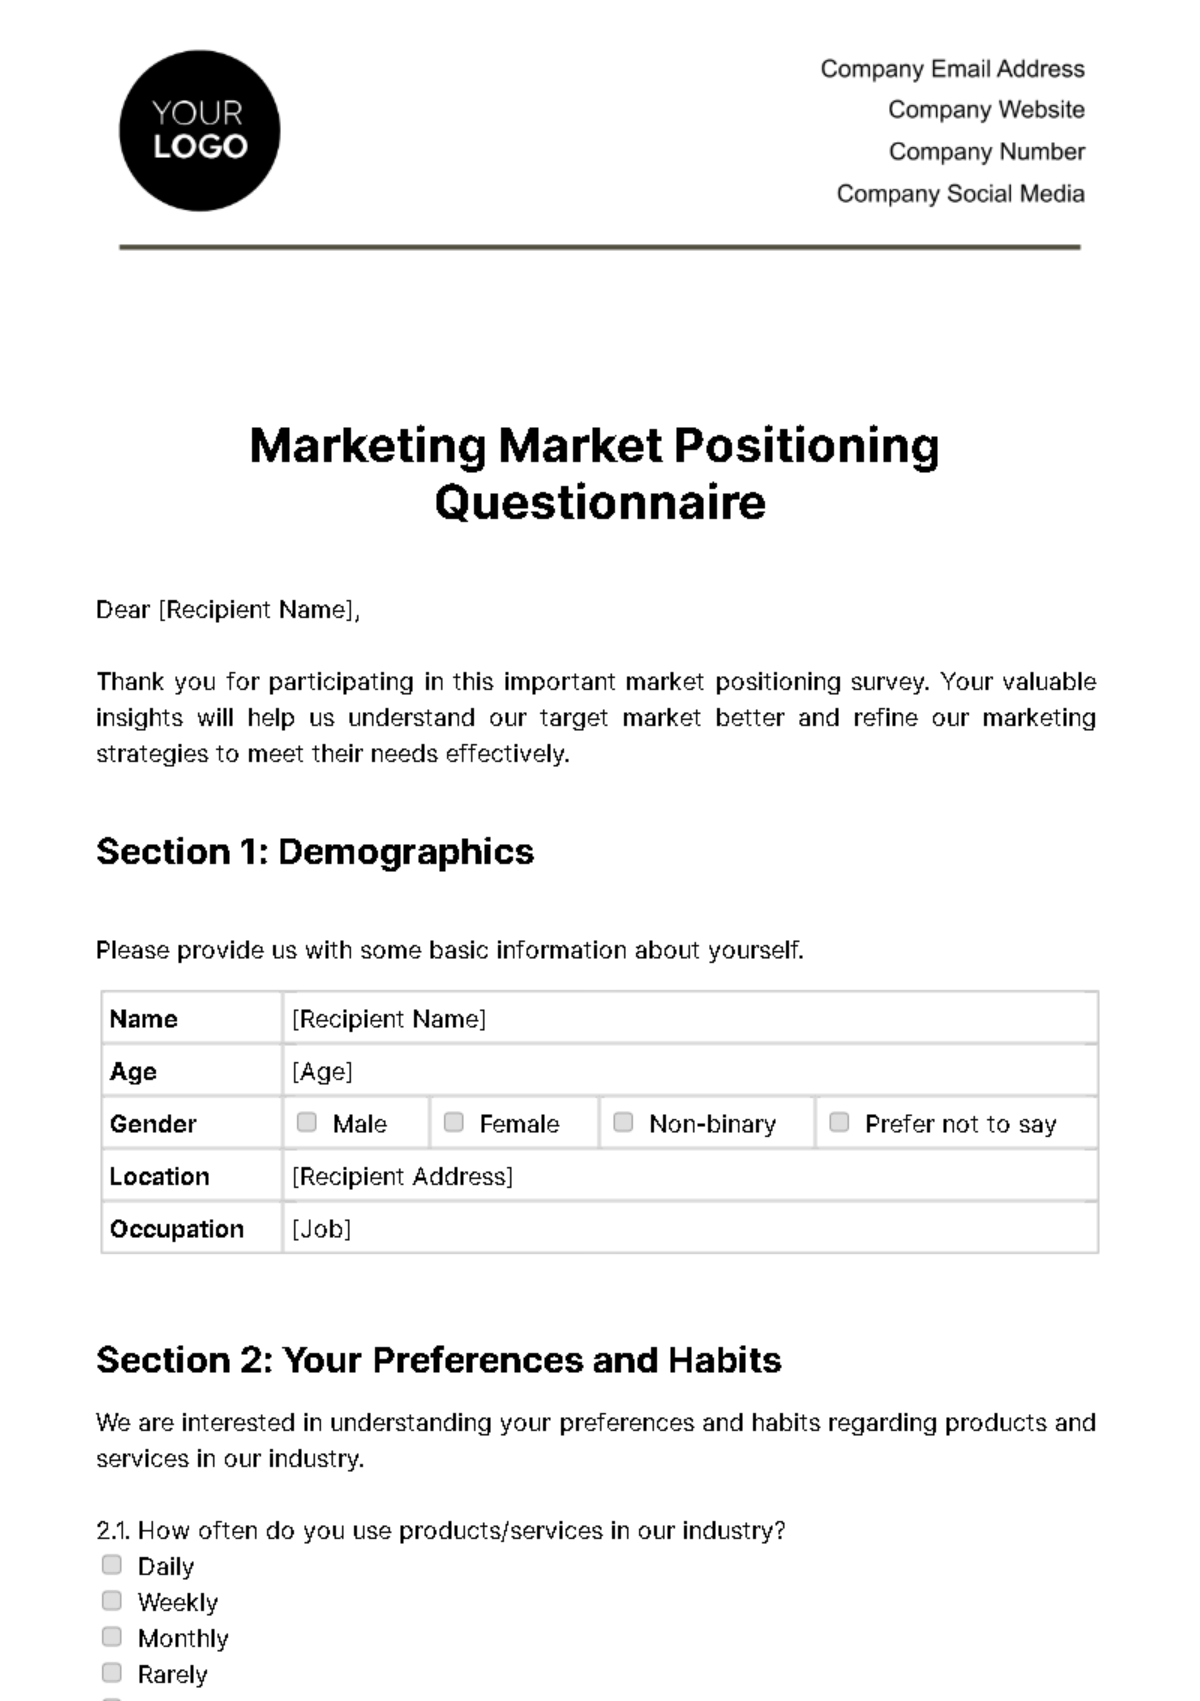 Marketing Market Positioning Questionnaire Template